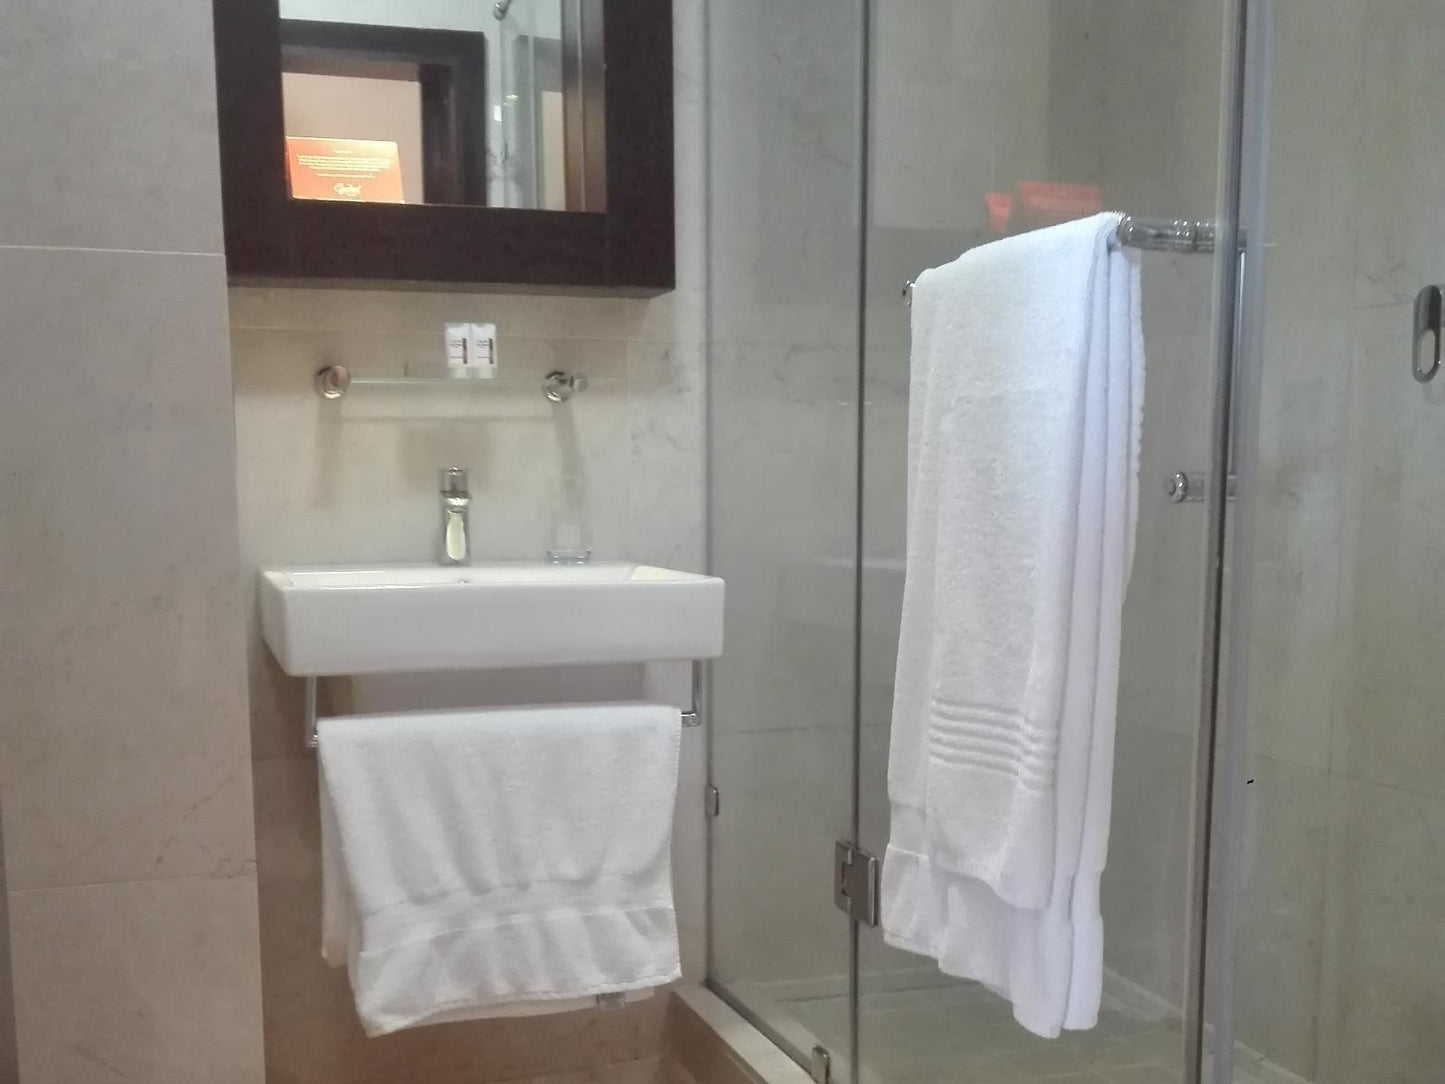 Cycad Guest House Polokwane Pietersburg Limpopo Province South Africa Unsaturated, Bathroom